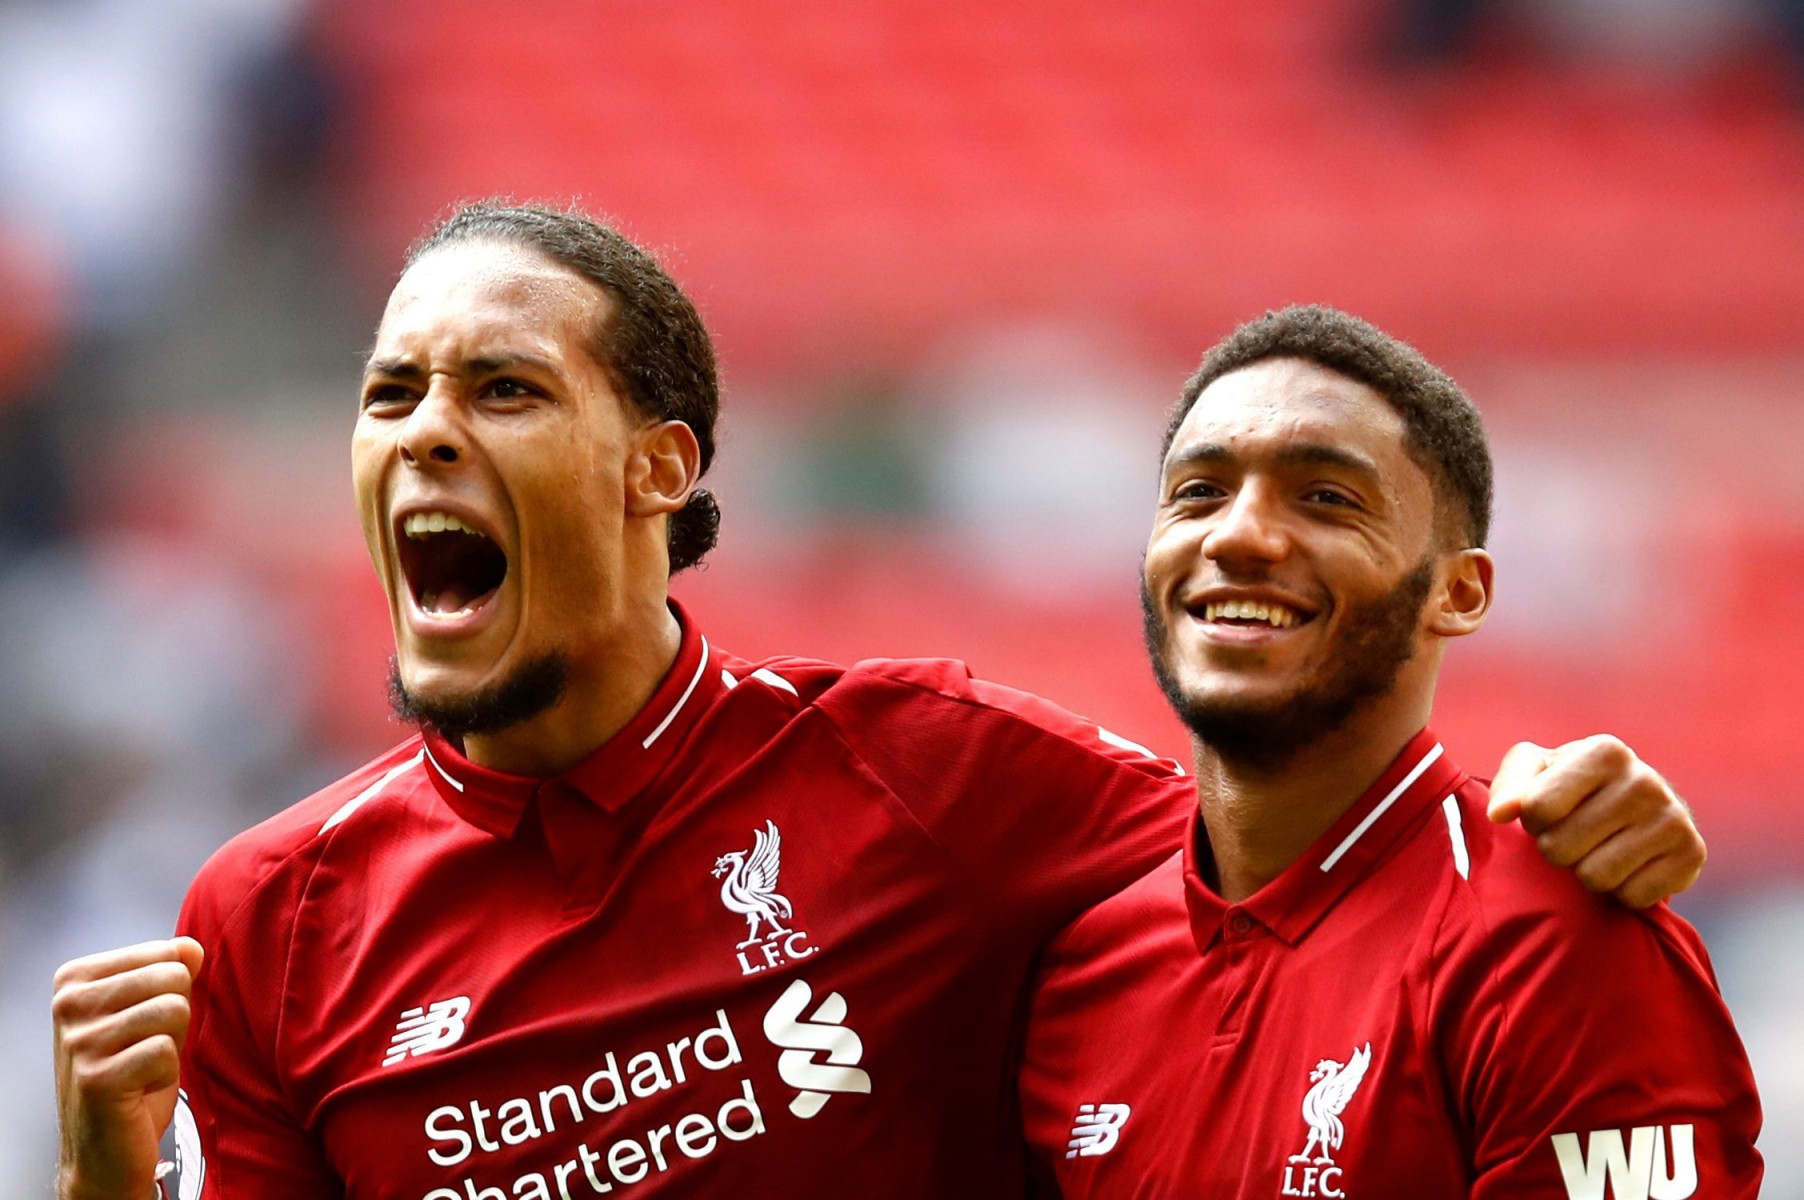 , Liverpool star Joe Gomez welcomed back to Anfield with open arms after boos from England fans